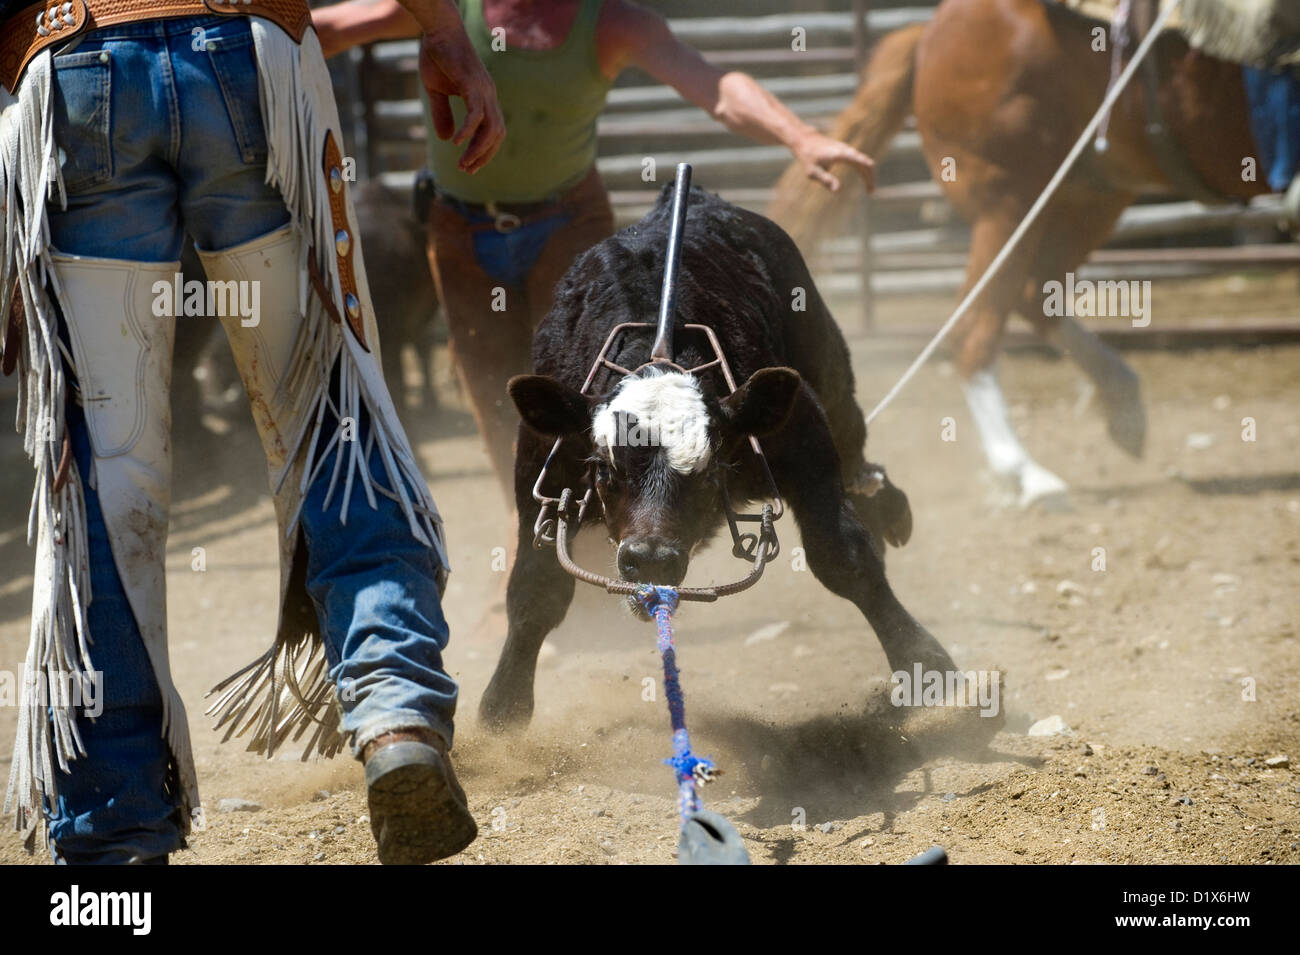 A calf is roped and captured during a branding at the Dalton Ranch in the Clover Valley, NV Stock Photo